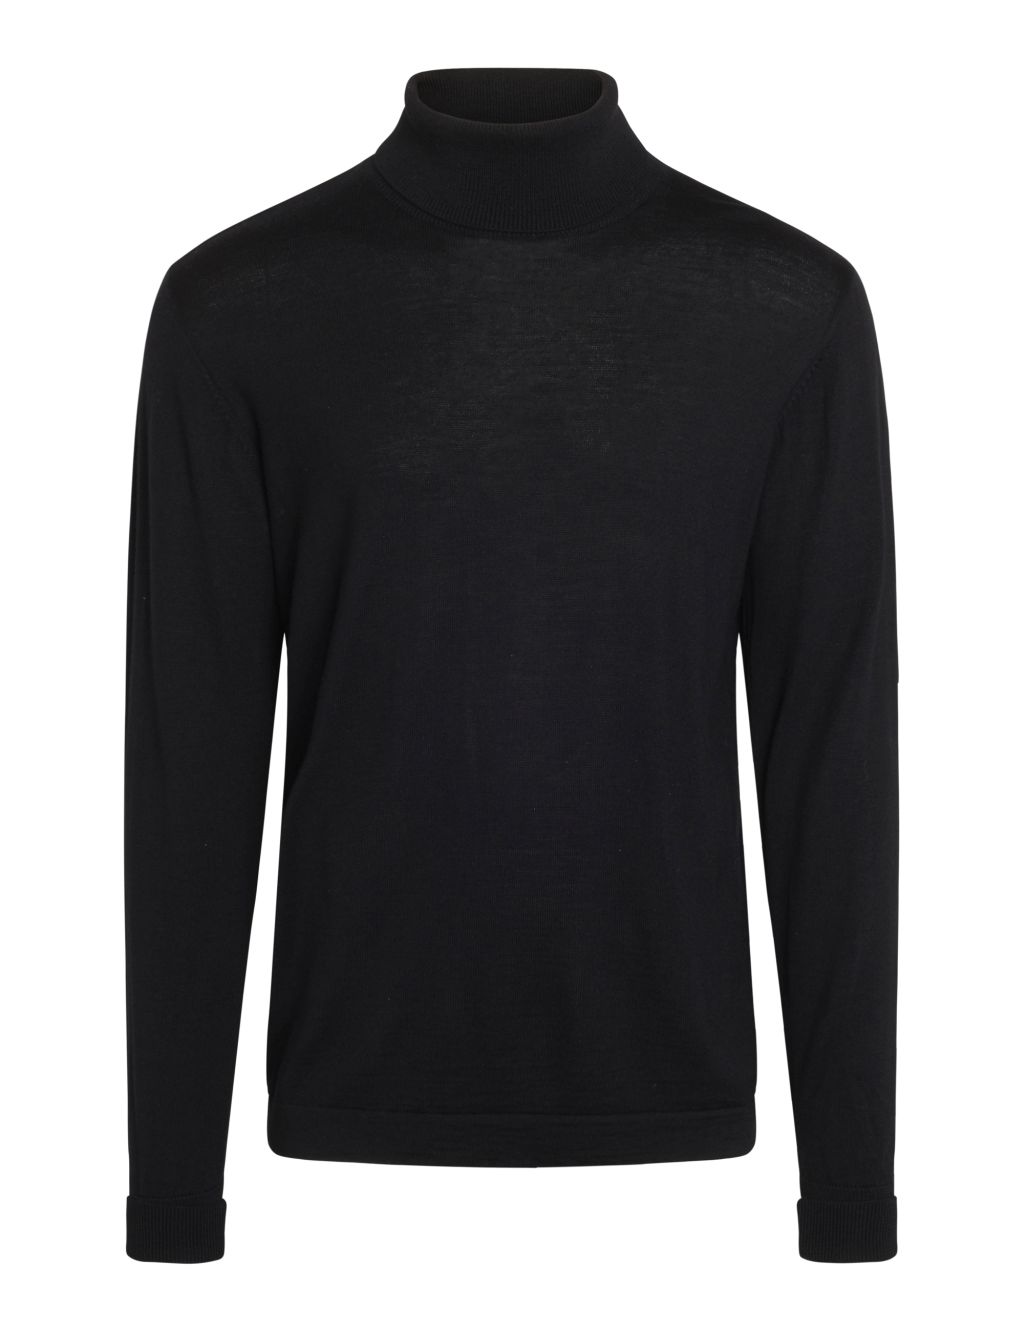 Anders Knit - Pullover Black XL